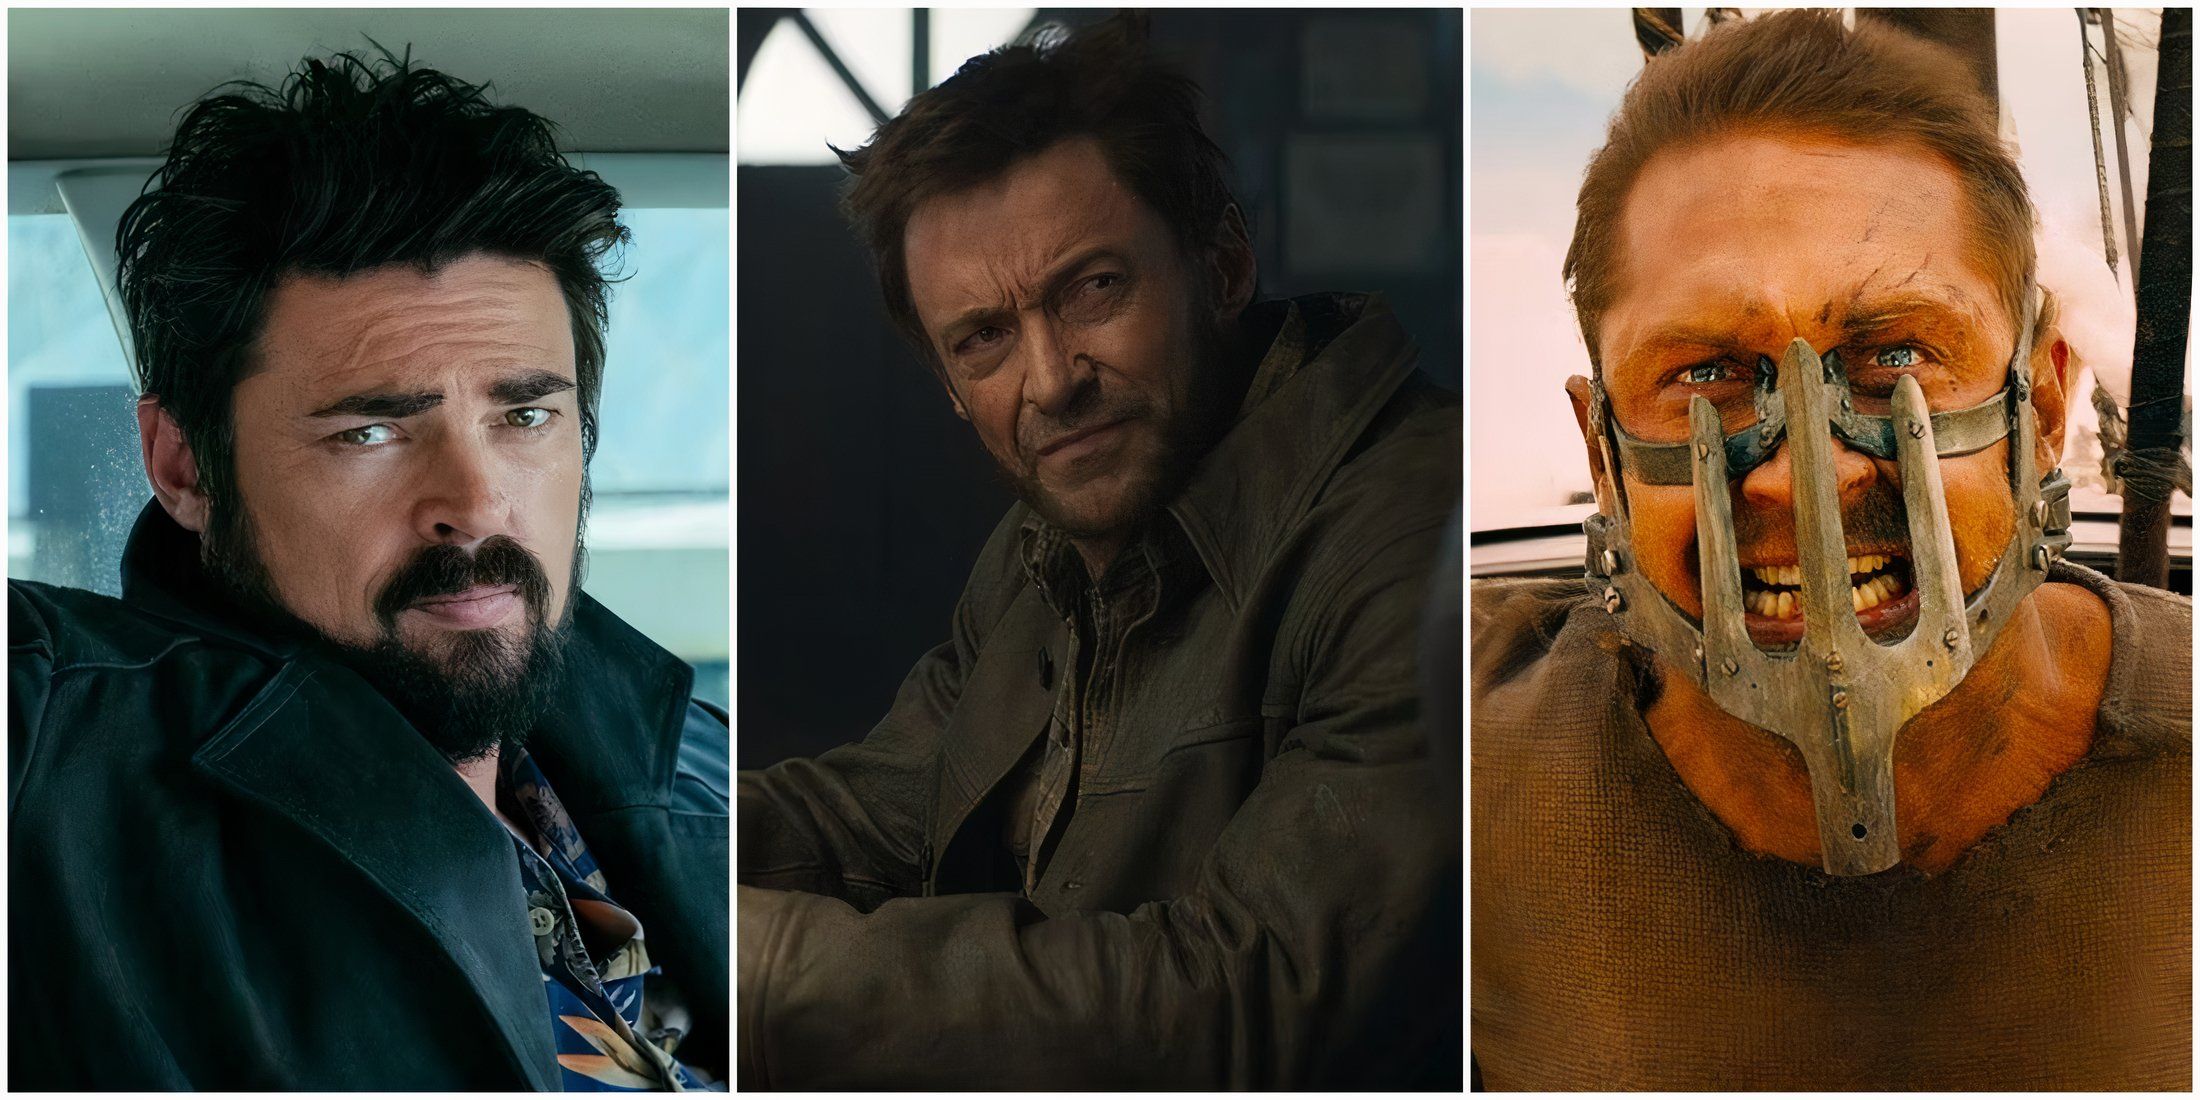 Karl Urban in The Boys, Hugh Jackman in X-Men, and Tom Hardy in Mad Max Fury Road